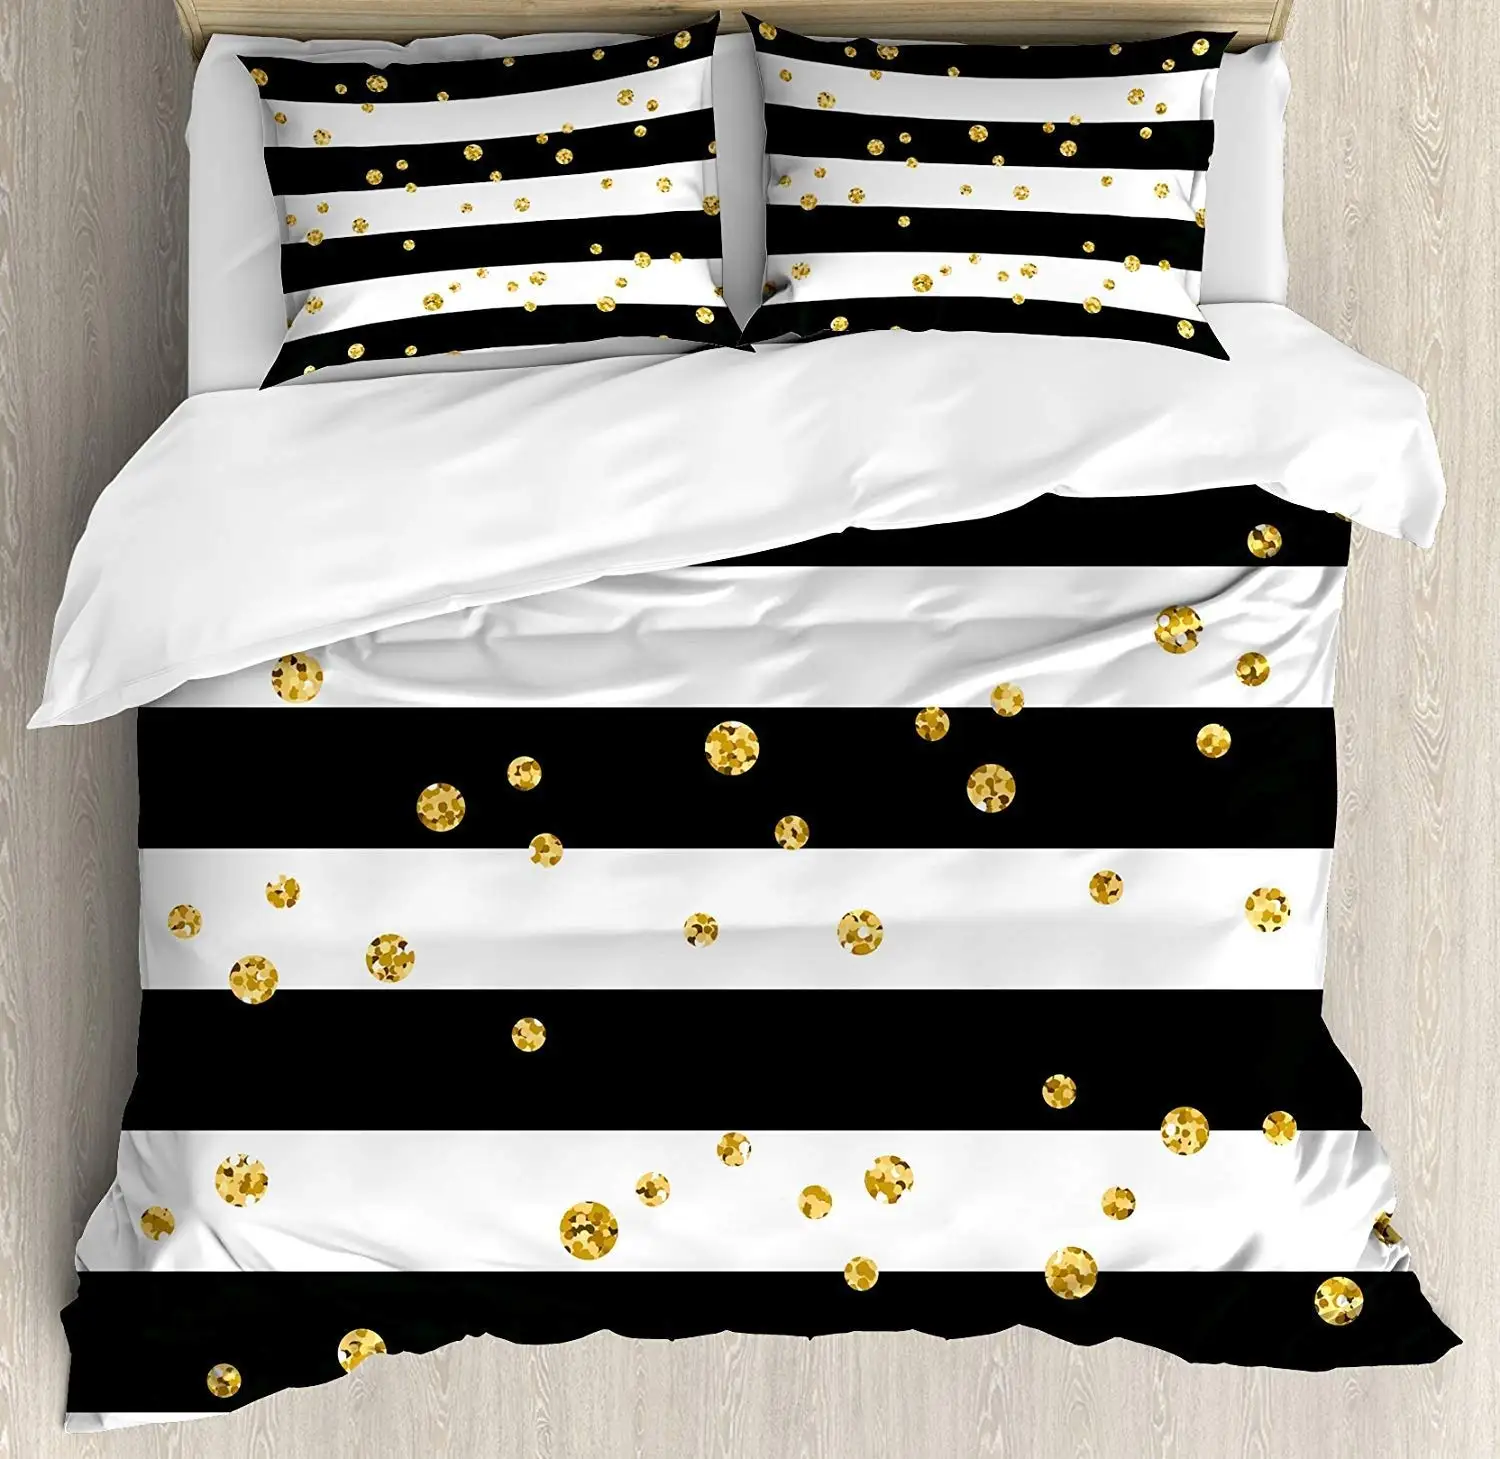 full size bed sets for girls